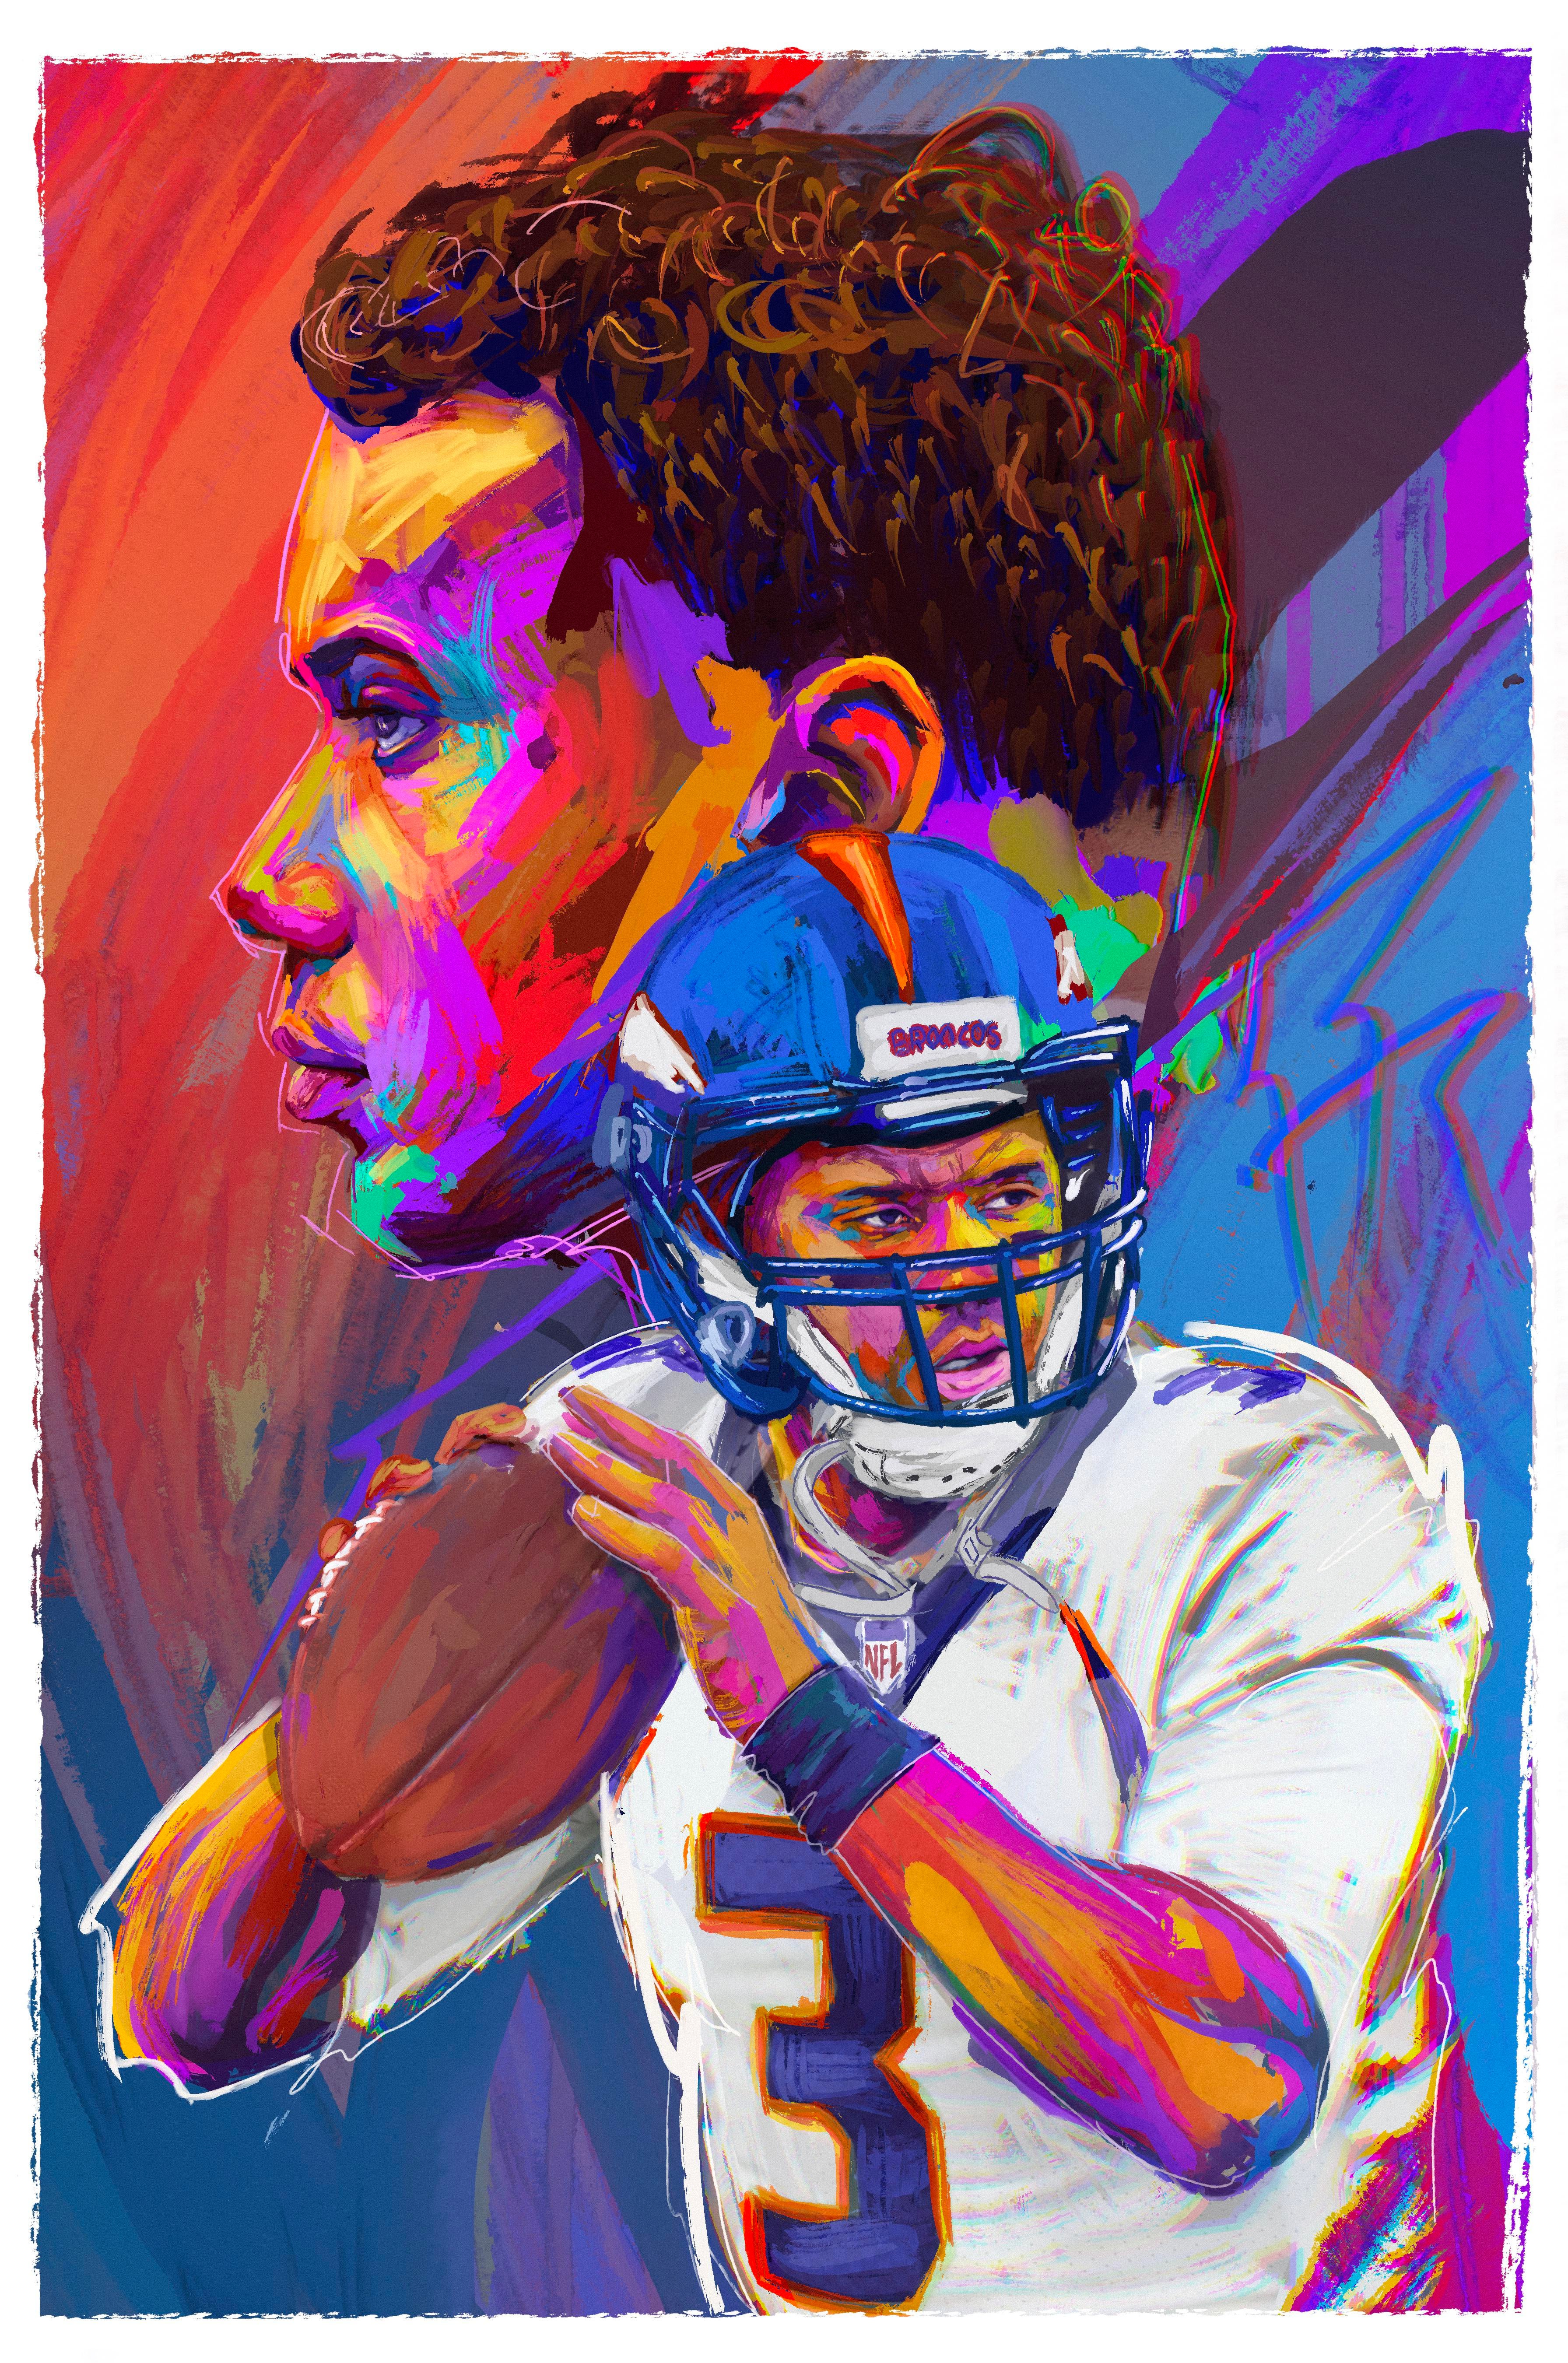 Has to make a Russell Wilson painting after hearing the news